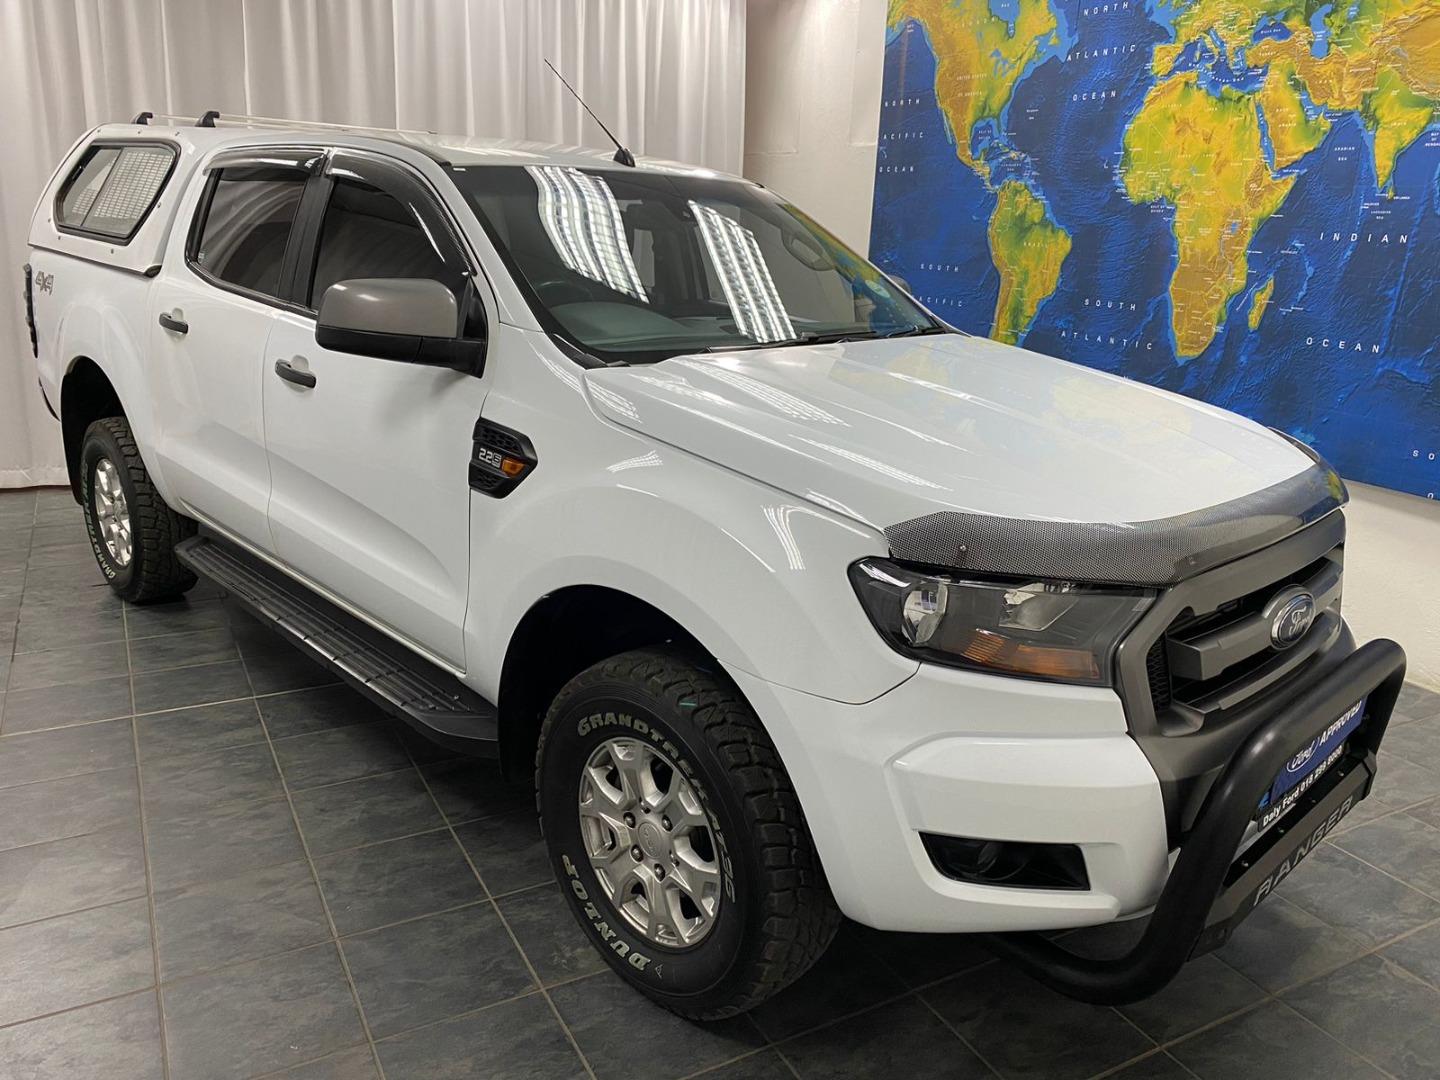 2017 Ford Ranger 2.2TDCi Double Cab 4x4 XLS Auto For Sale